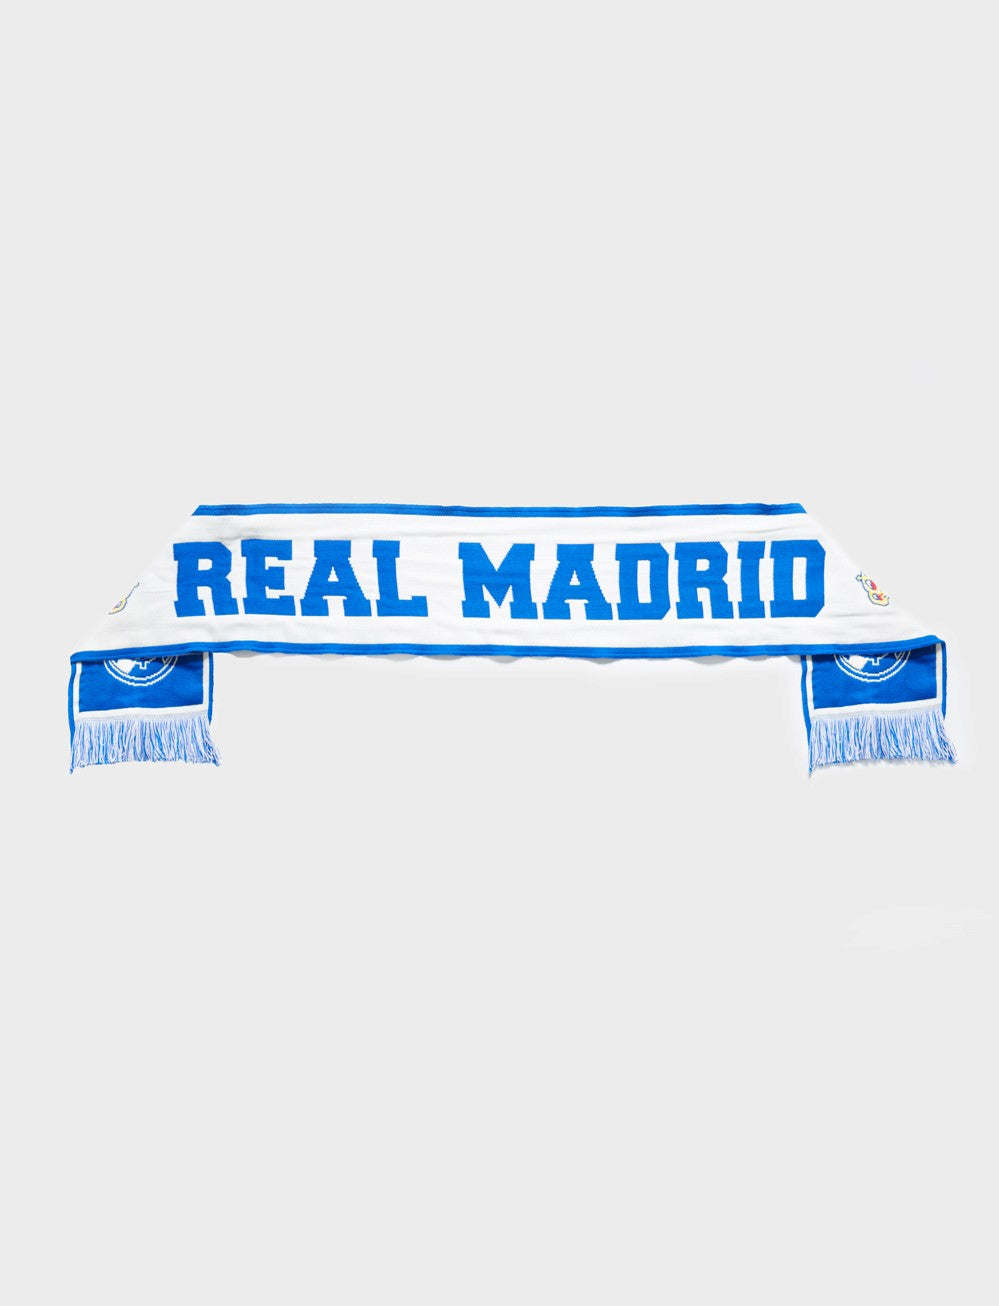 Official Real Madrid Knitted Scarf - The World Football Store